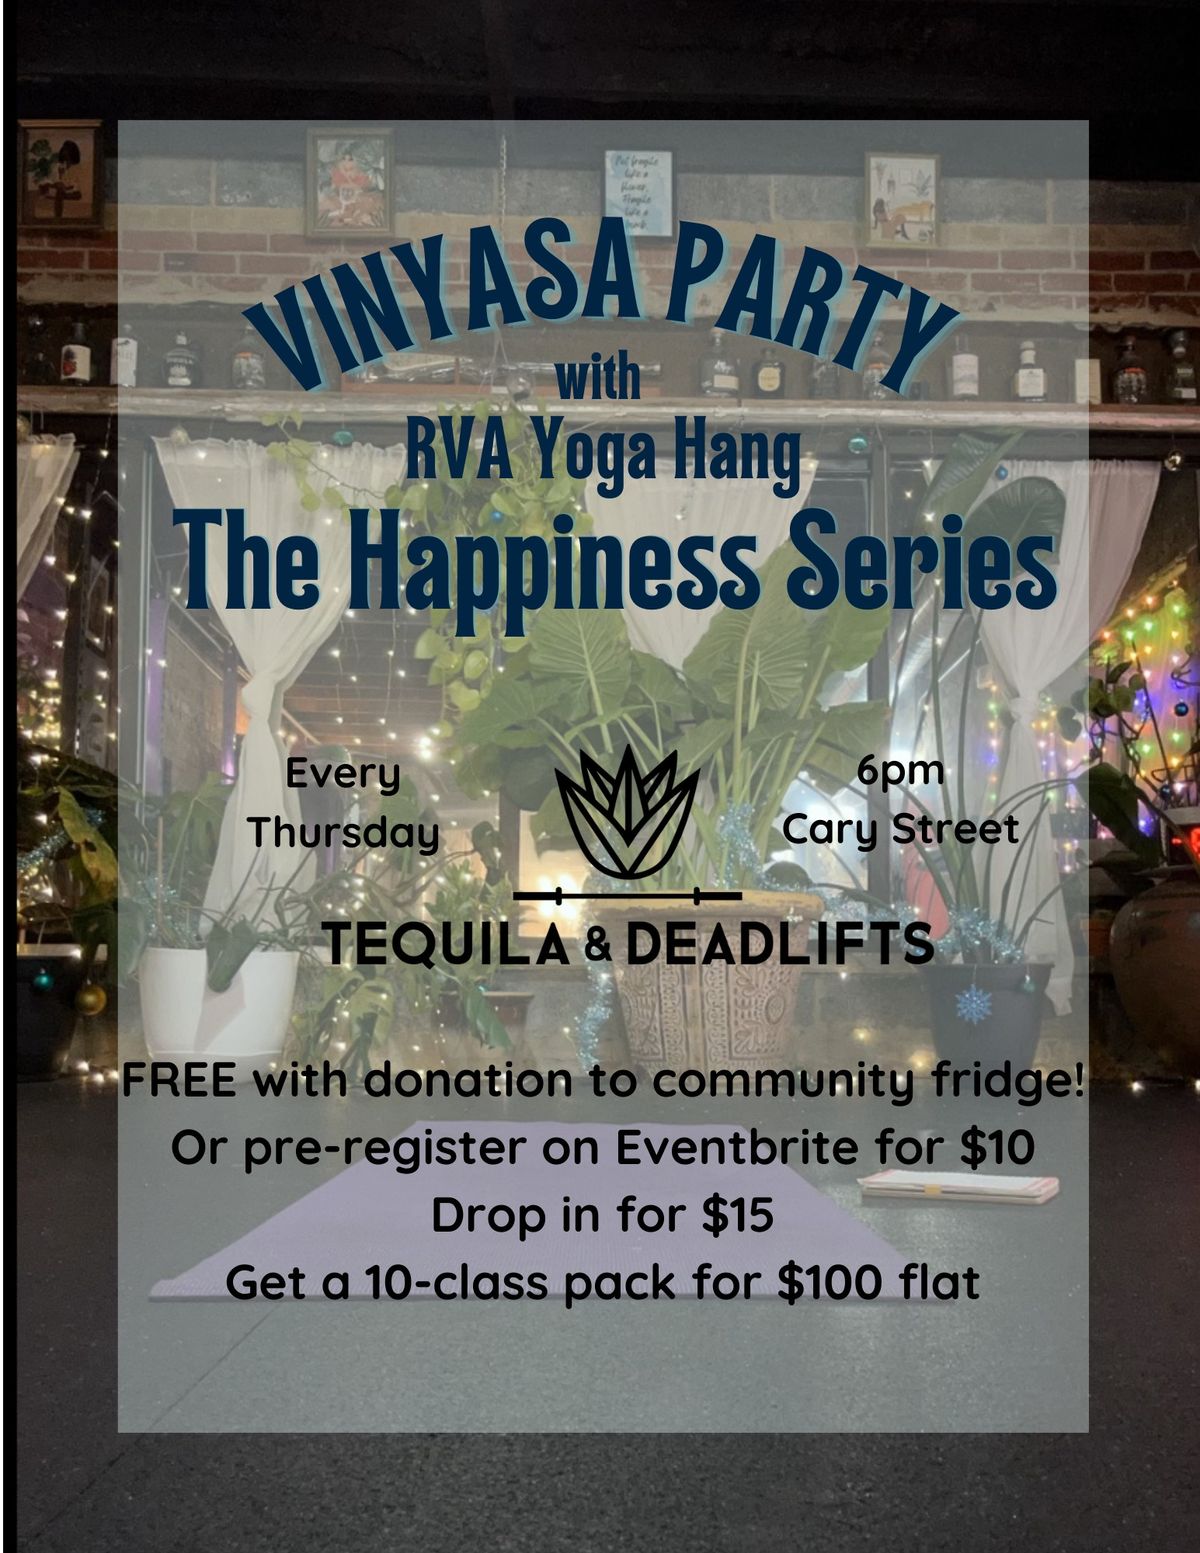 Vinyasa Party Weekly Thursdays - The Happiness Series at Tequila and Deadlifts